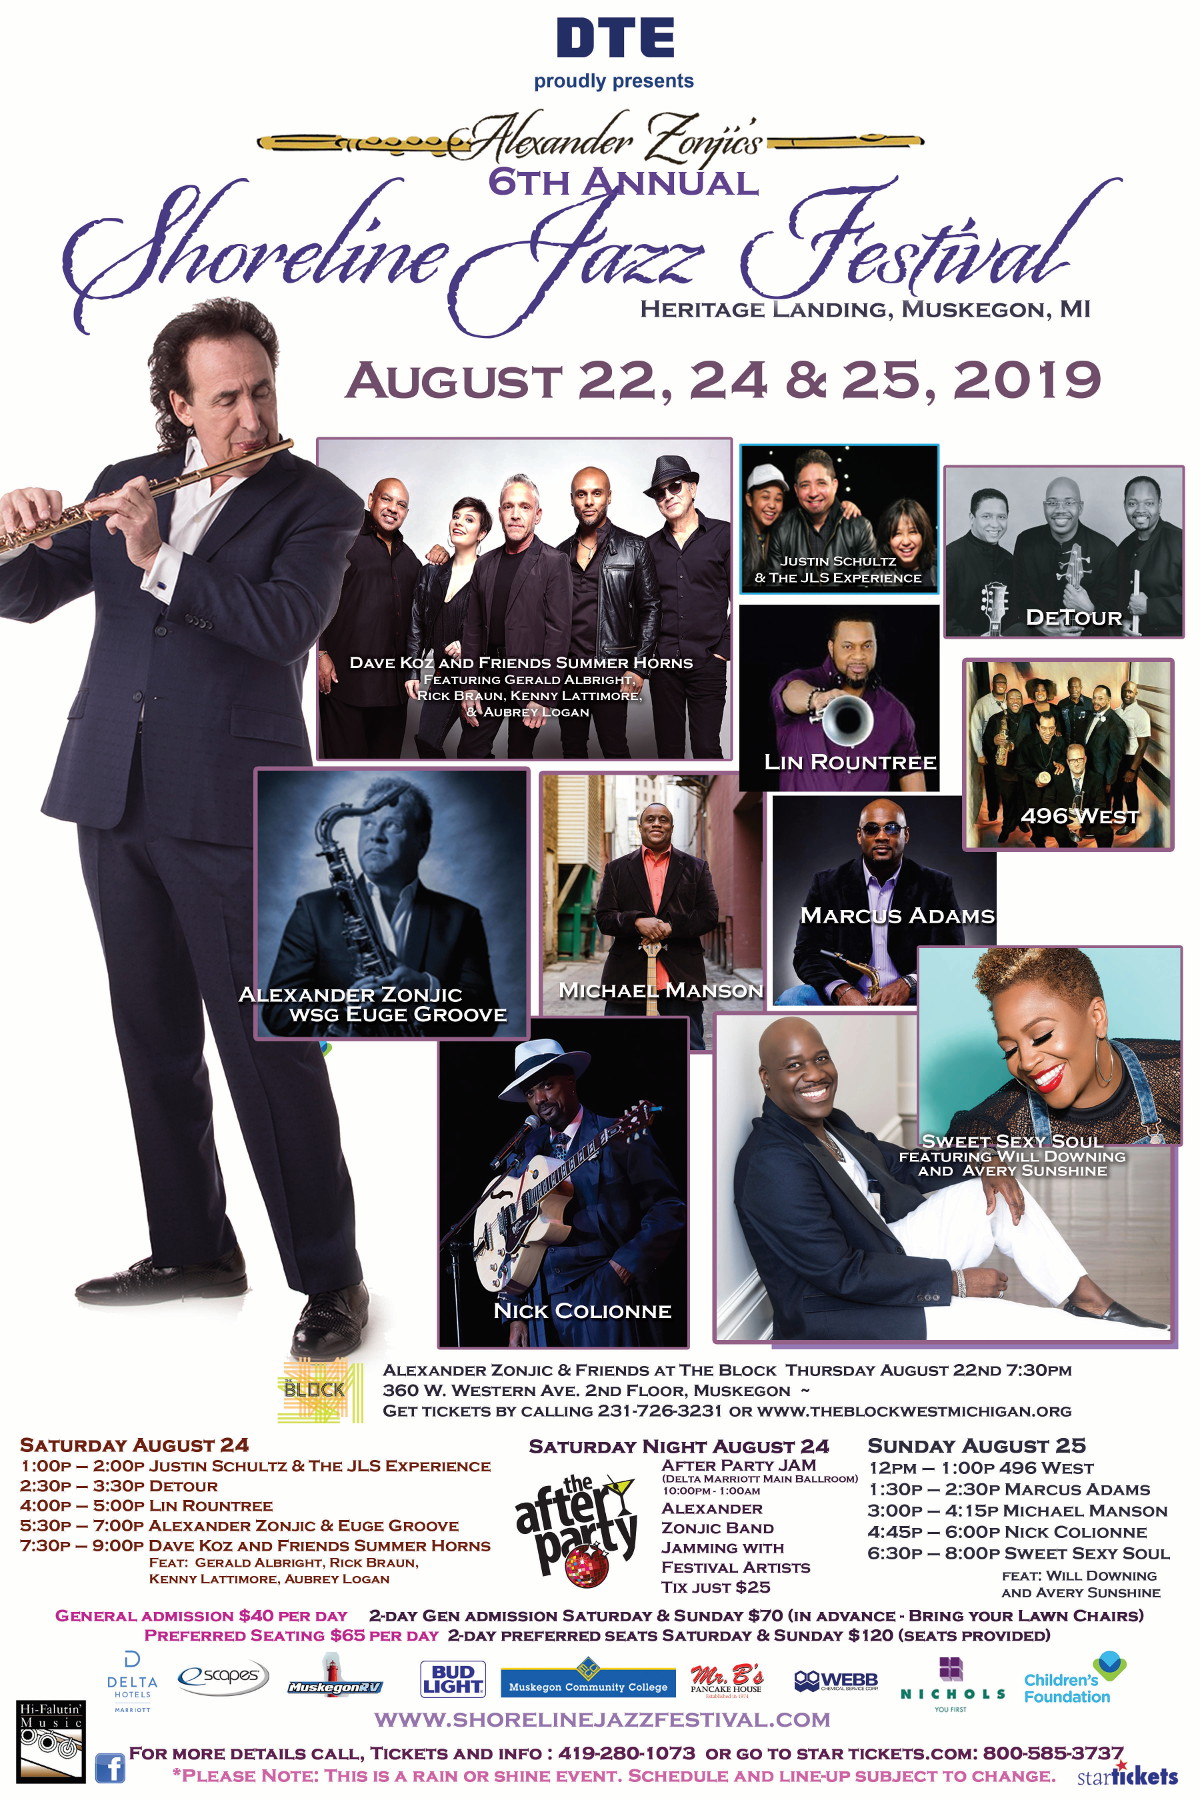 6th Annual Shoreline Jazz Festival coming on August 22, 24 and 25